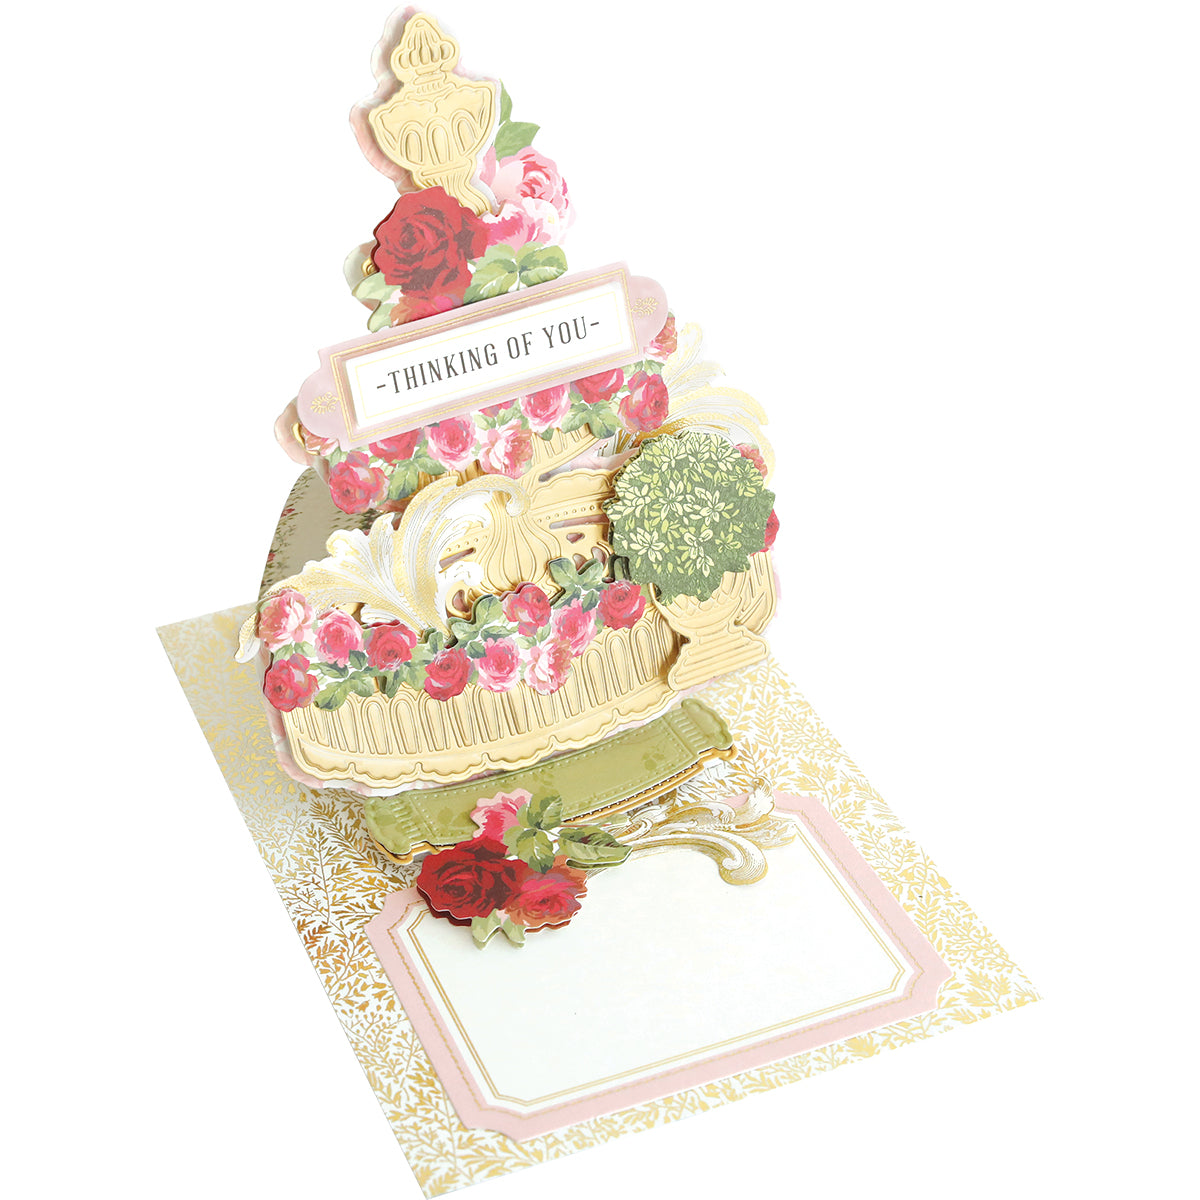 A pop up card featuring a cake and flowers, adorned with Garden Fountain 3D Easel Dies.